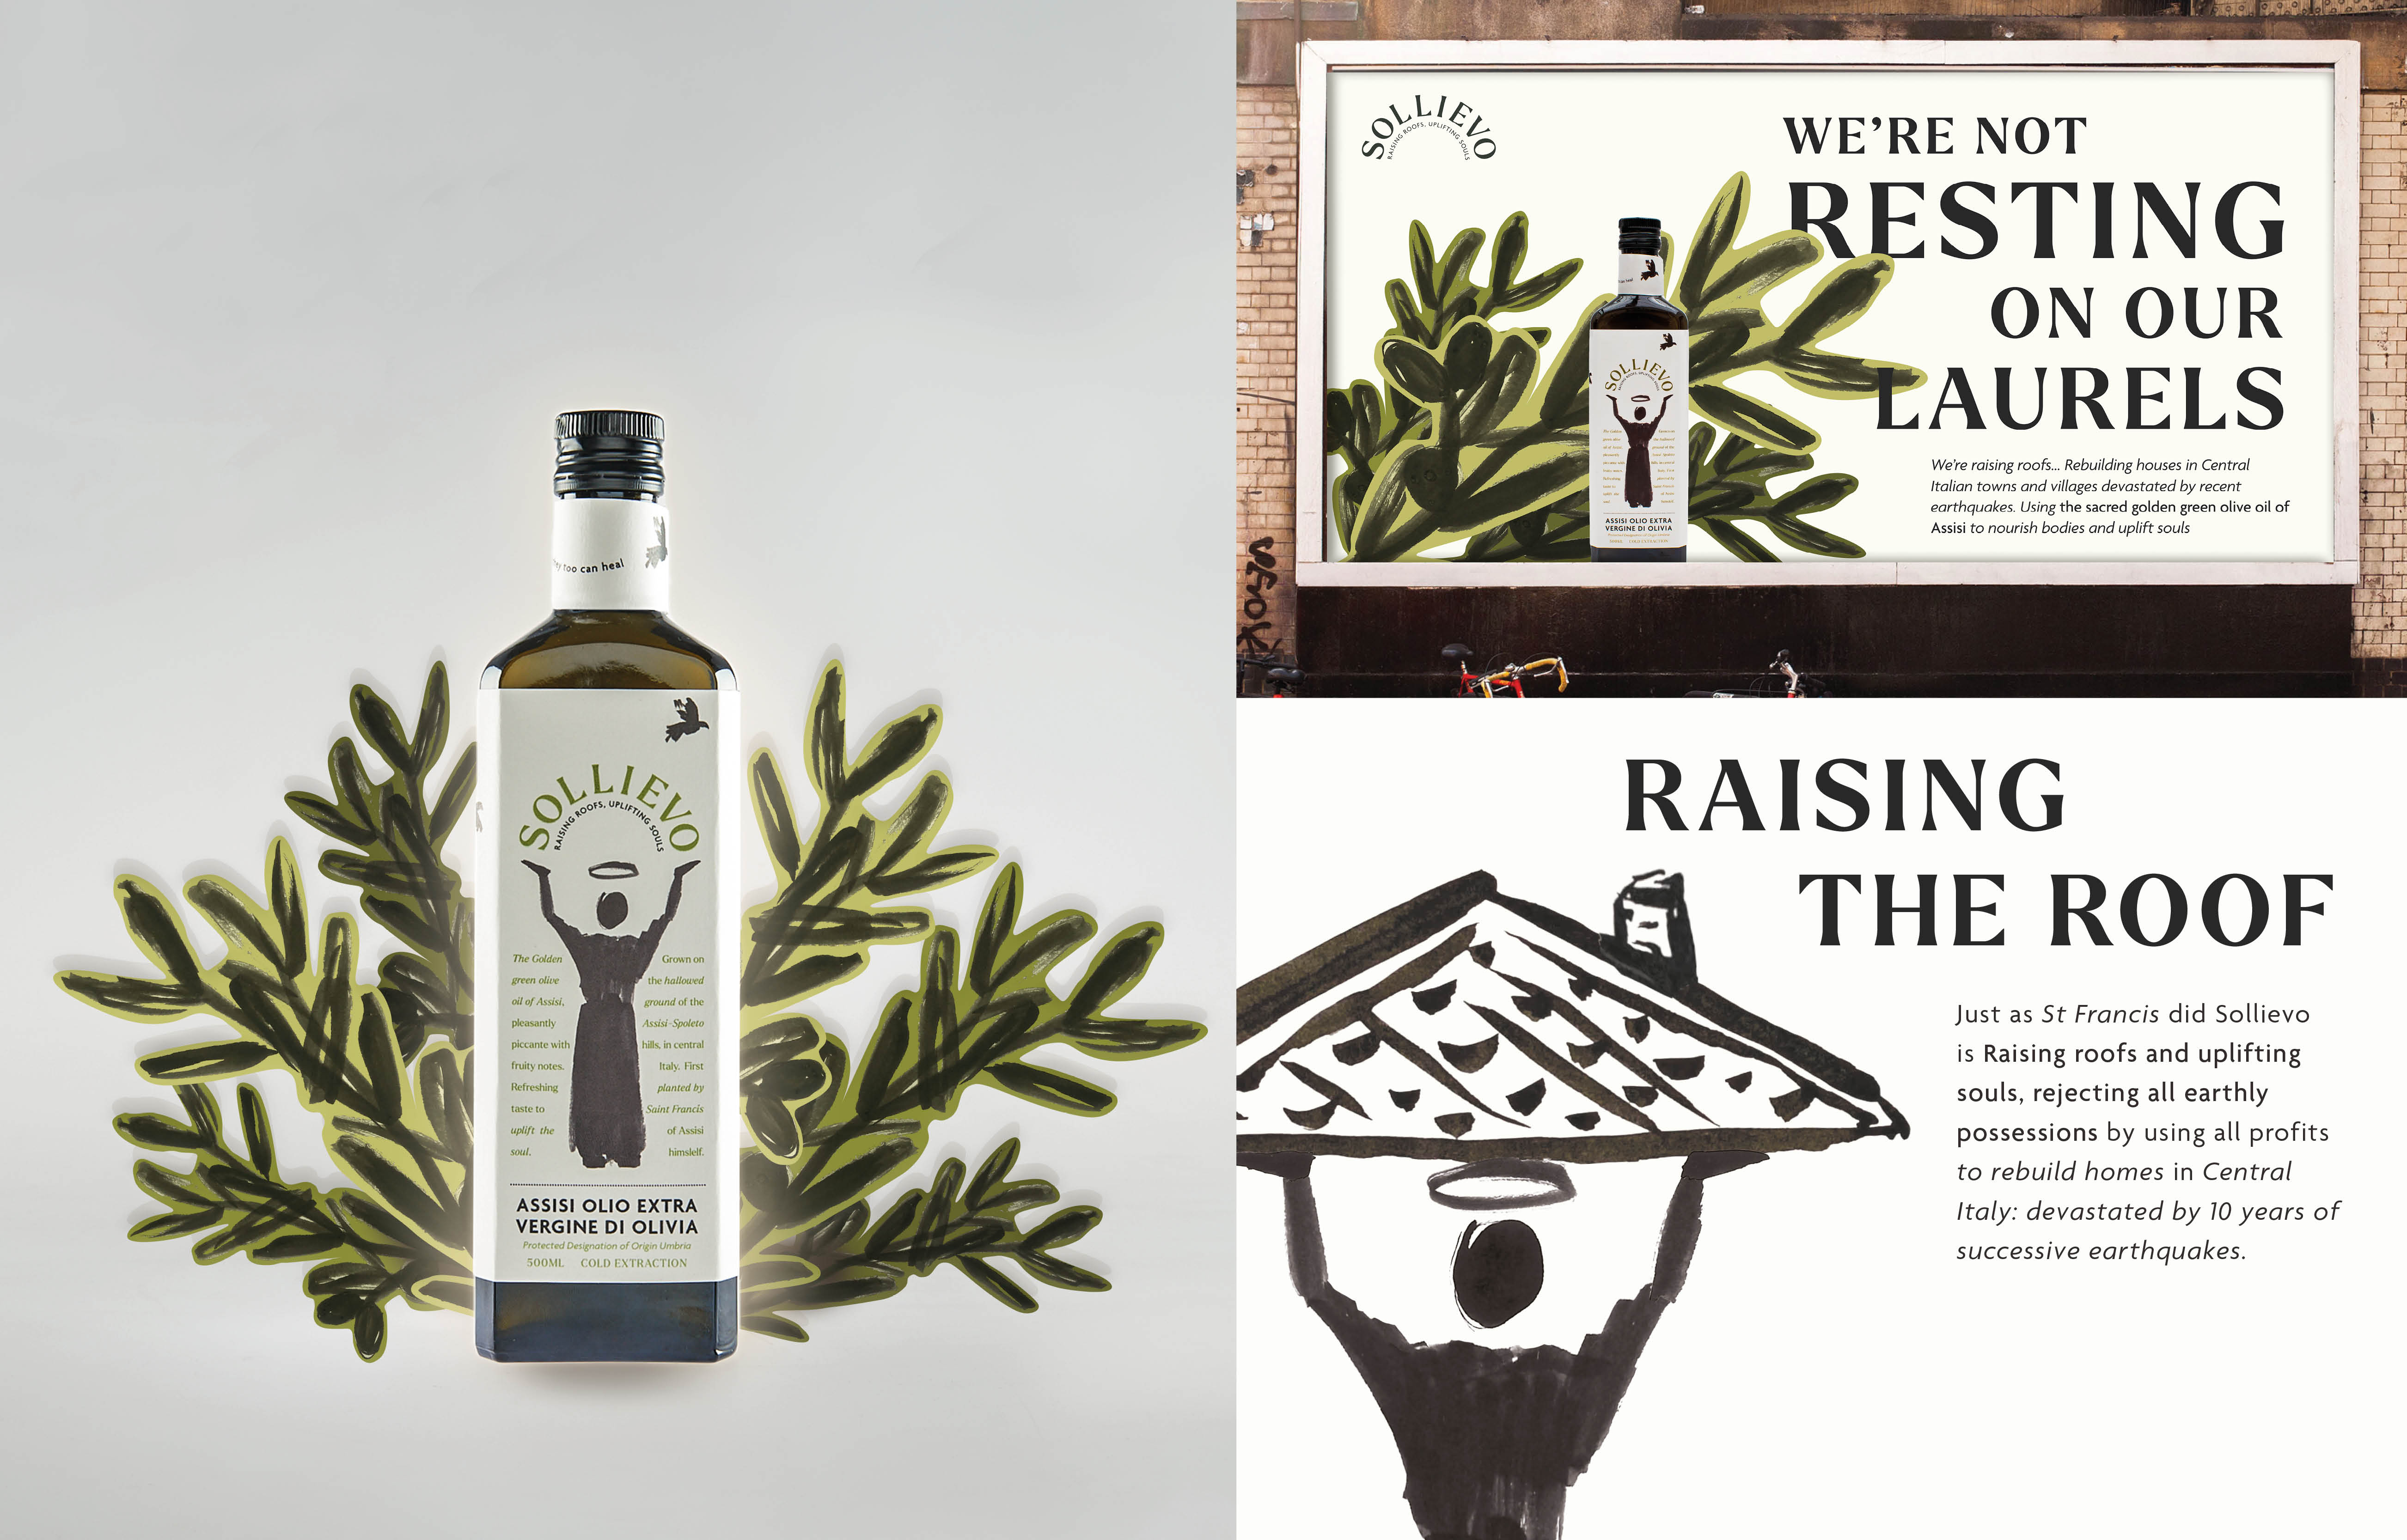 Packaging & Visual Identity for Sollievo, mocked up onto bottle and billboard. Packaging design inclues figure on white backdrop and green plants behind product.